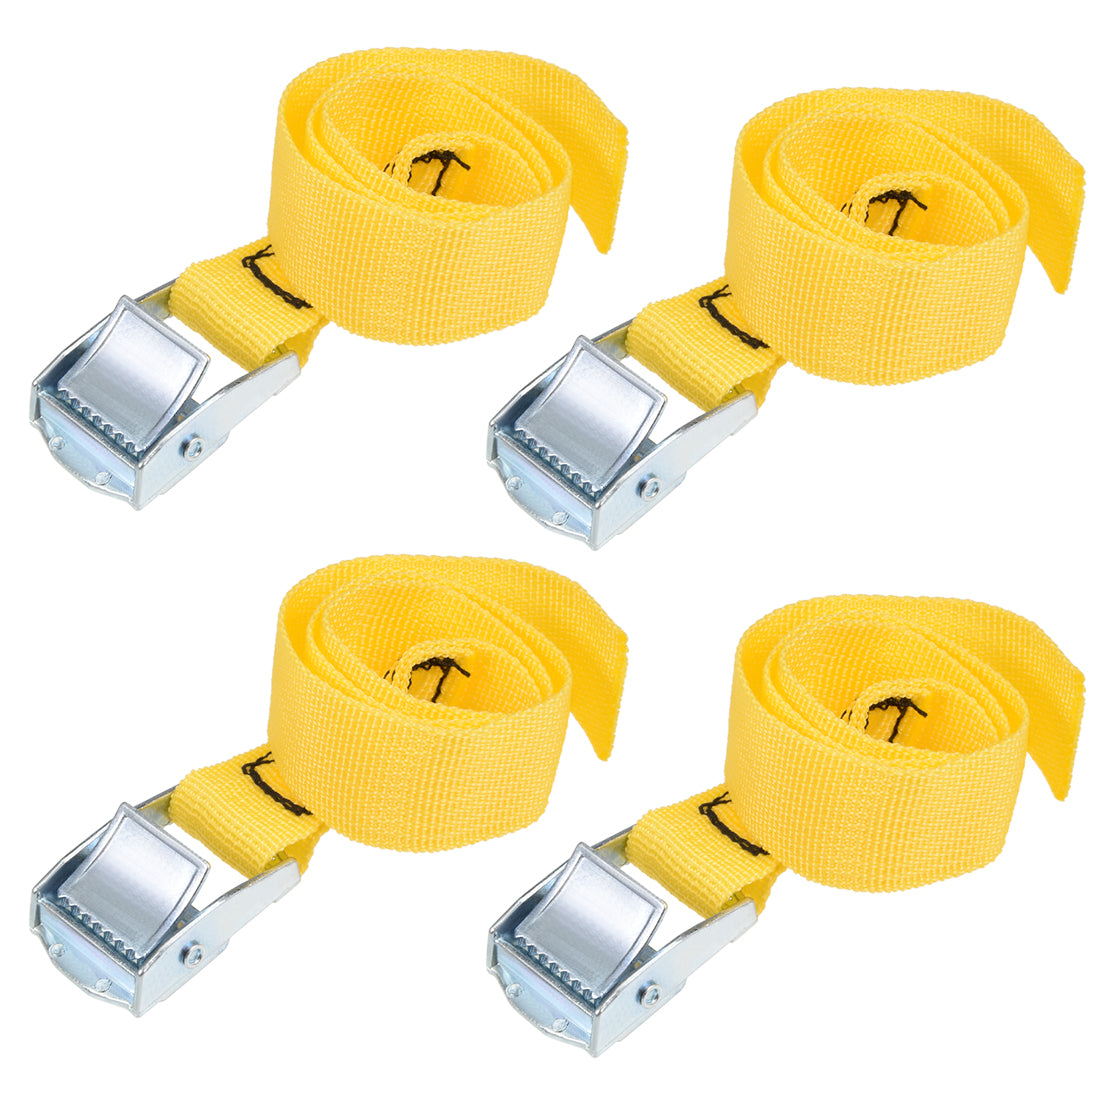 uxcell Uxcell 0.5M x 25mm Lashing Strap Cargo Tie Down Straps w Cam Lock Buckle 250Kg Work Load, Yellow, 4Pcs